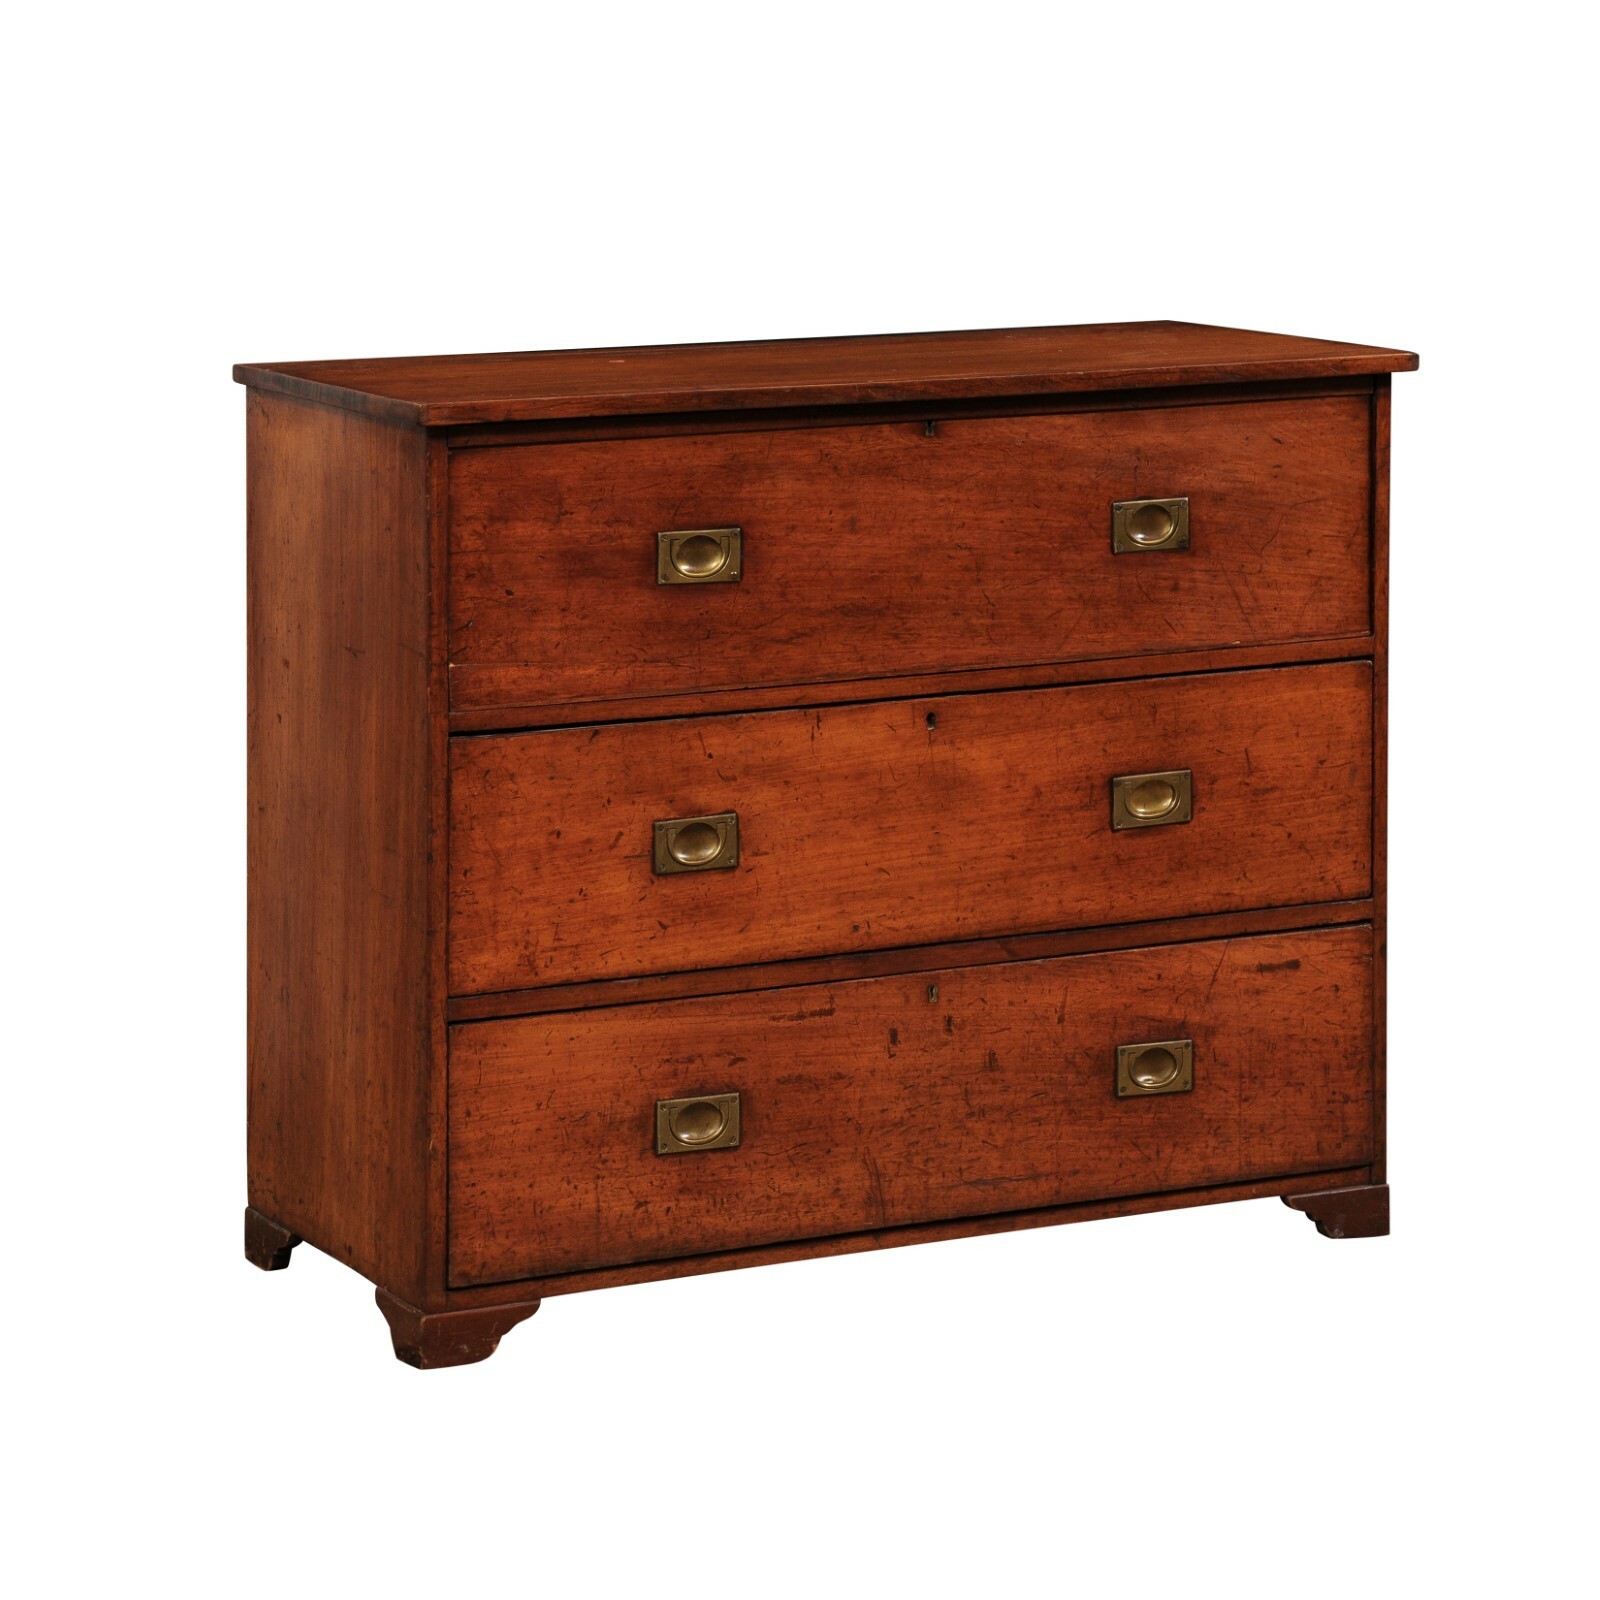 Early 19th C. English Campaign-Style Chest